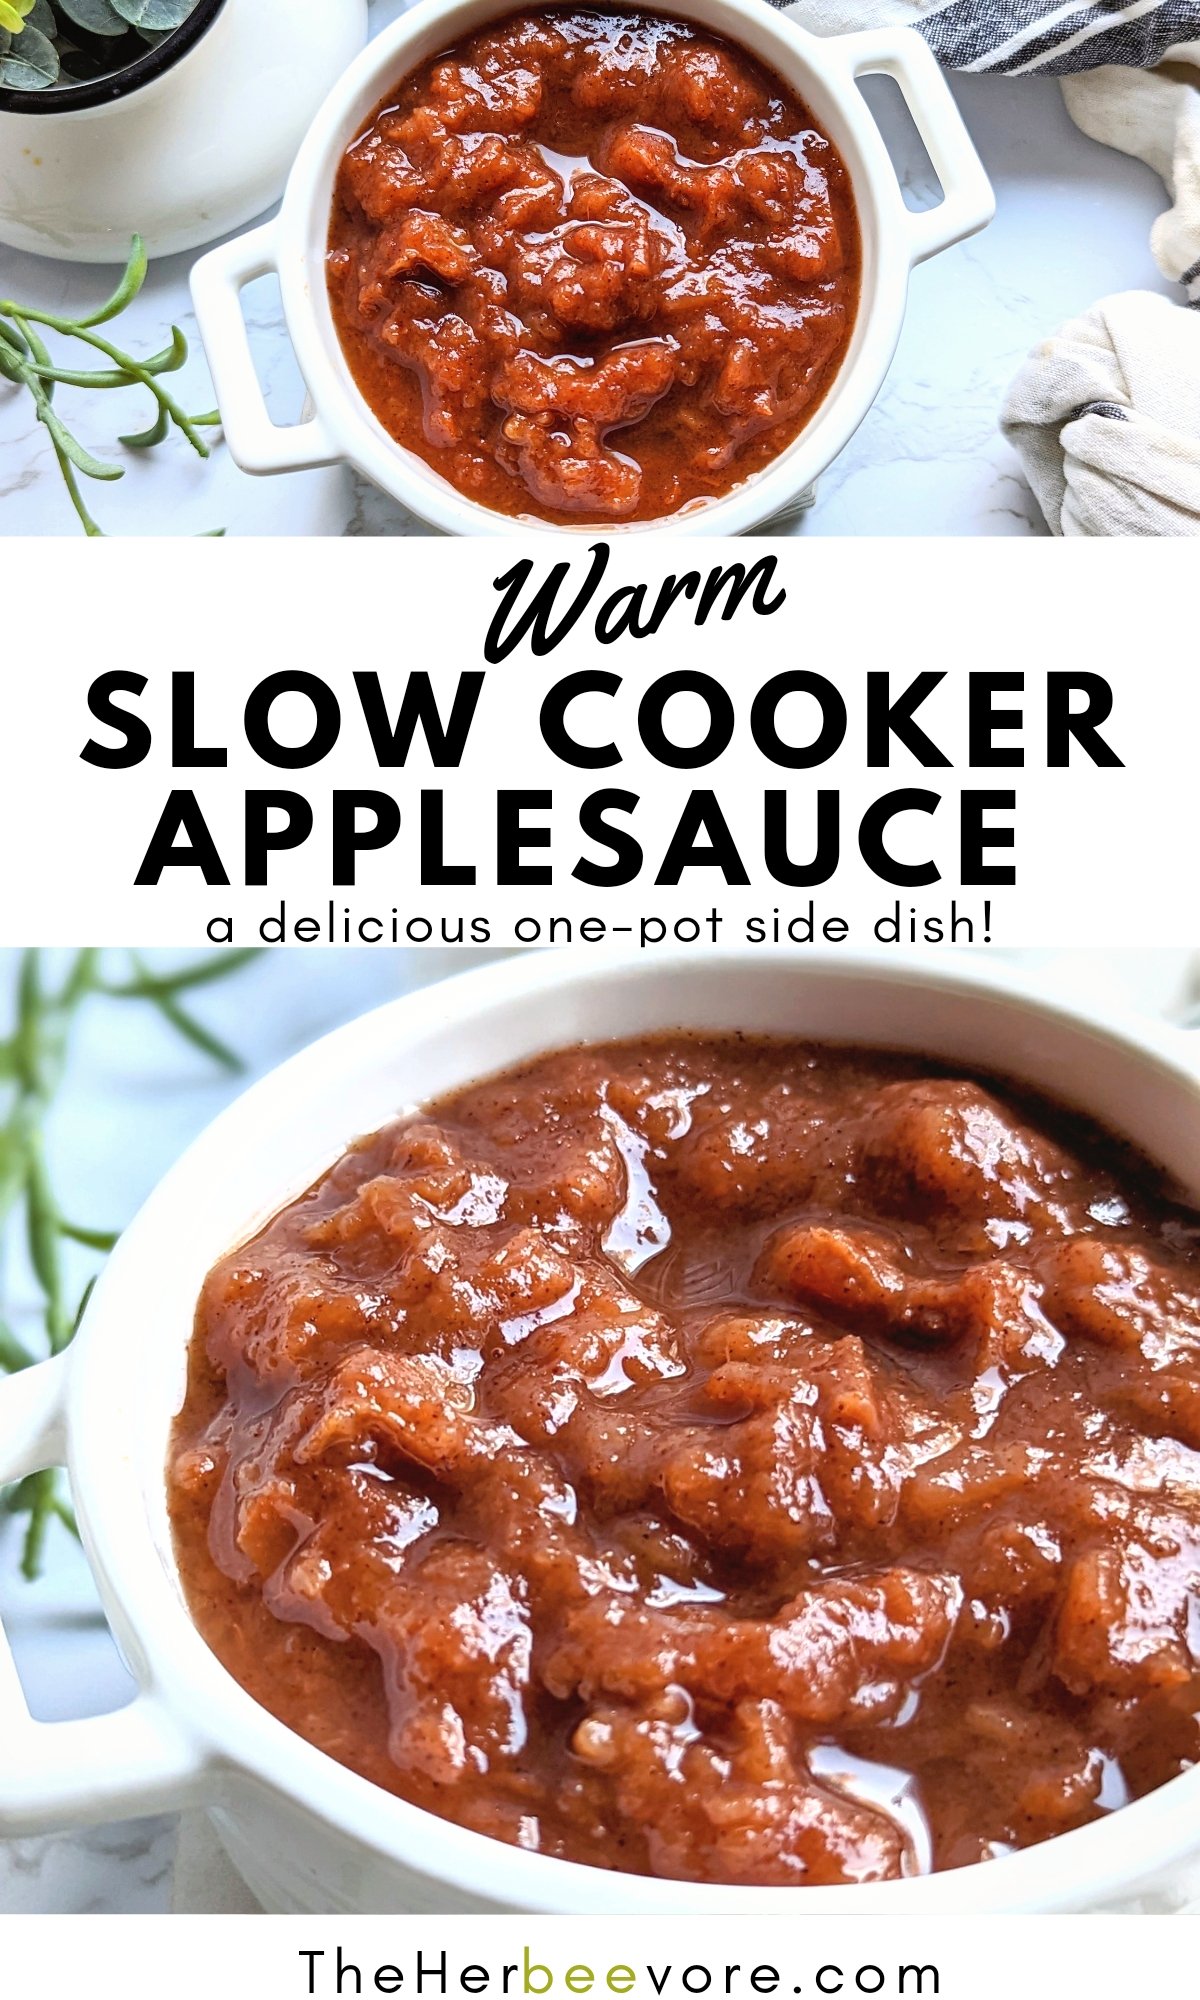 slow cooker applesauce with peels on recipe skin on apple sauce recipe with local new england orchard apples whats the best apple variety for apple sauce